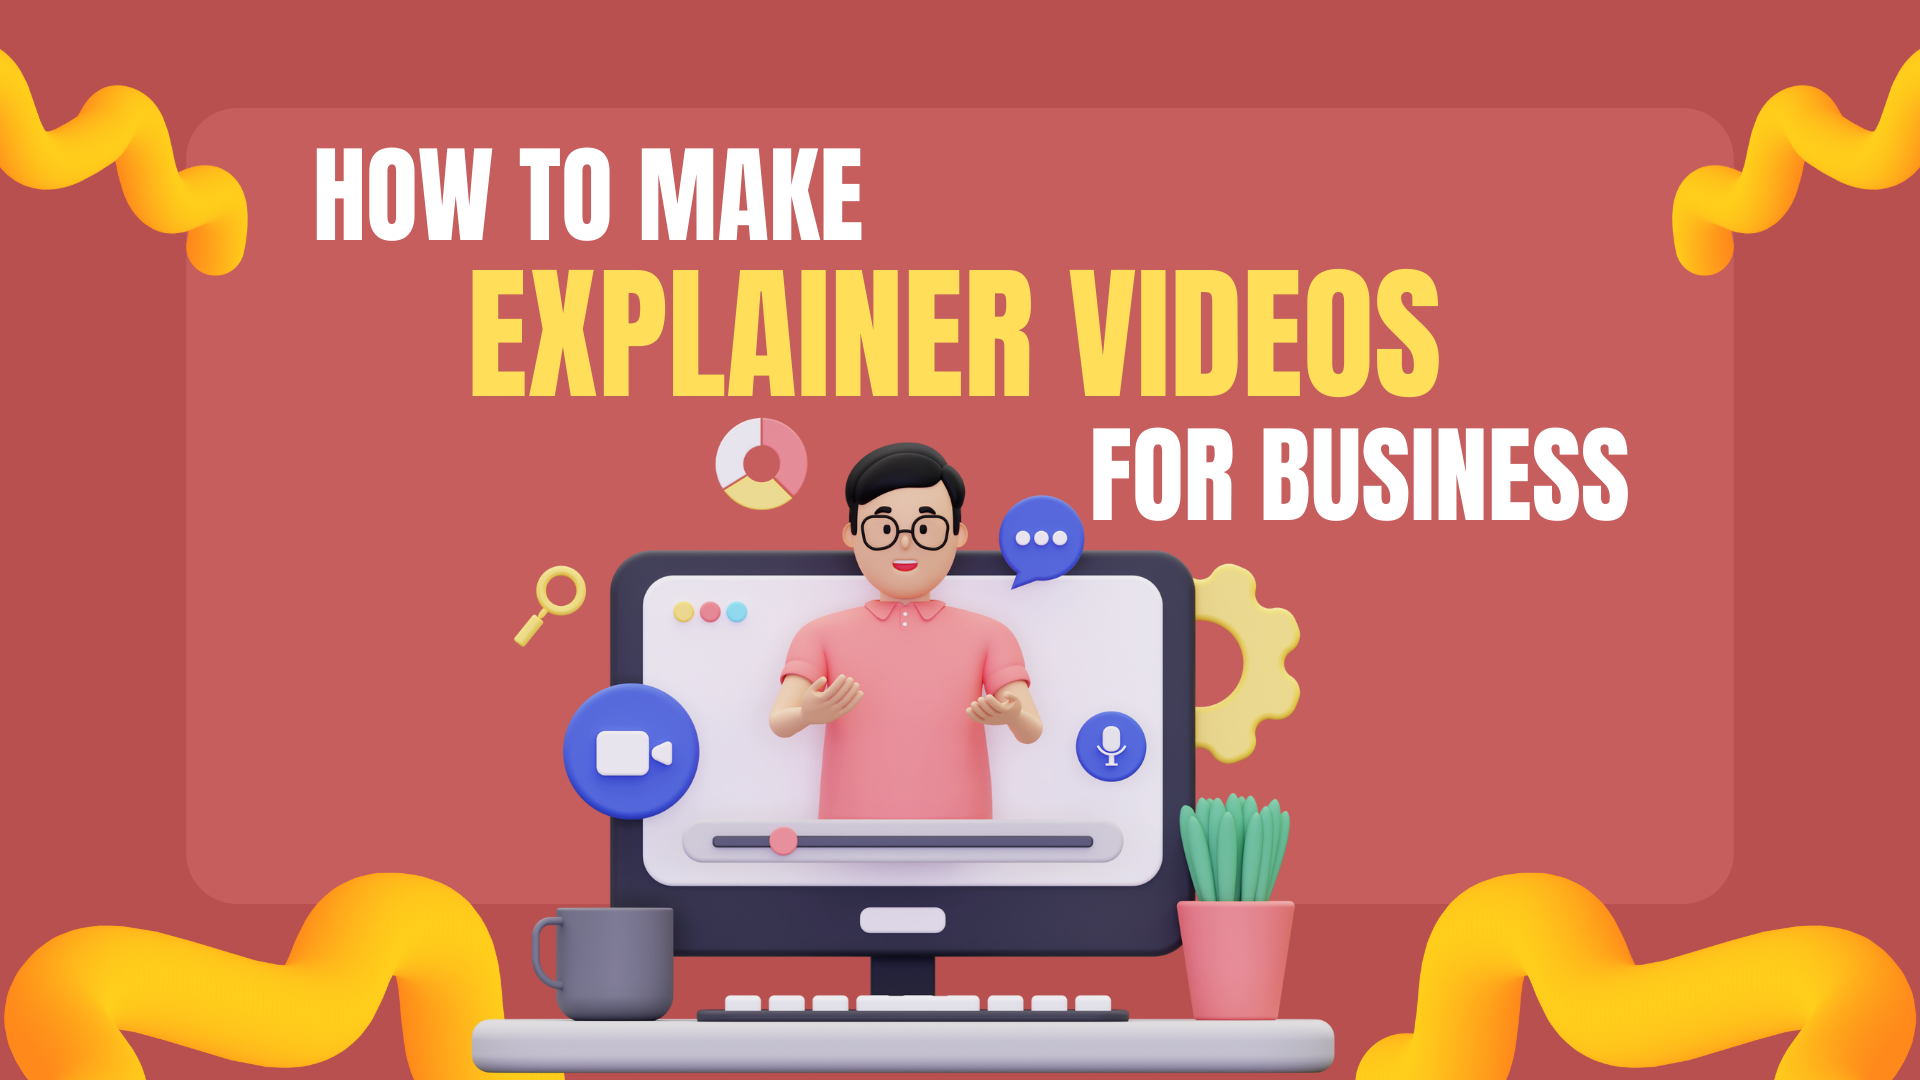 How to Make Explainer Videos for Business